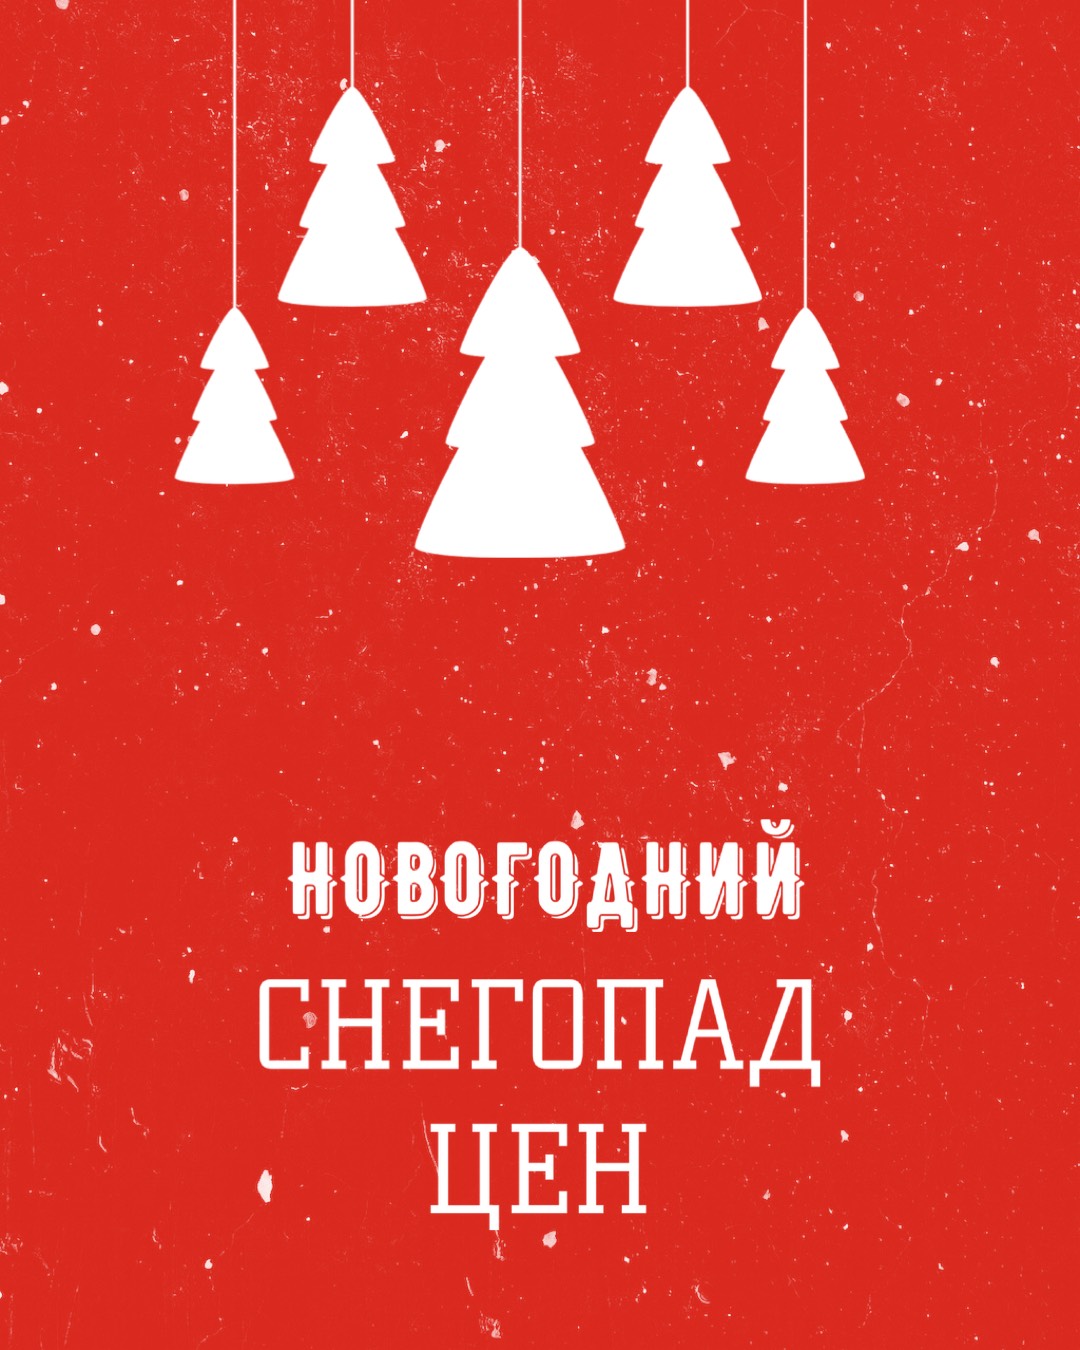 A Red Poster With White Christmas Trees Hanging From It Template